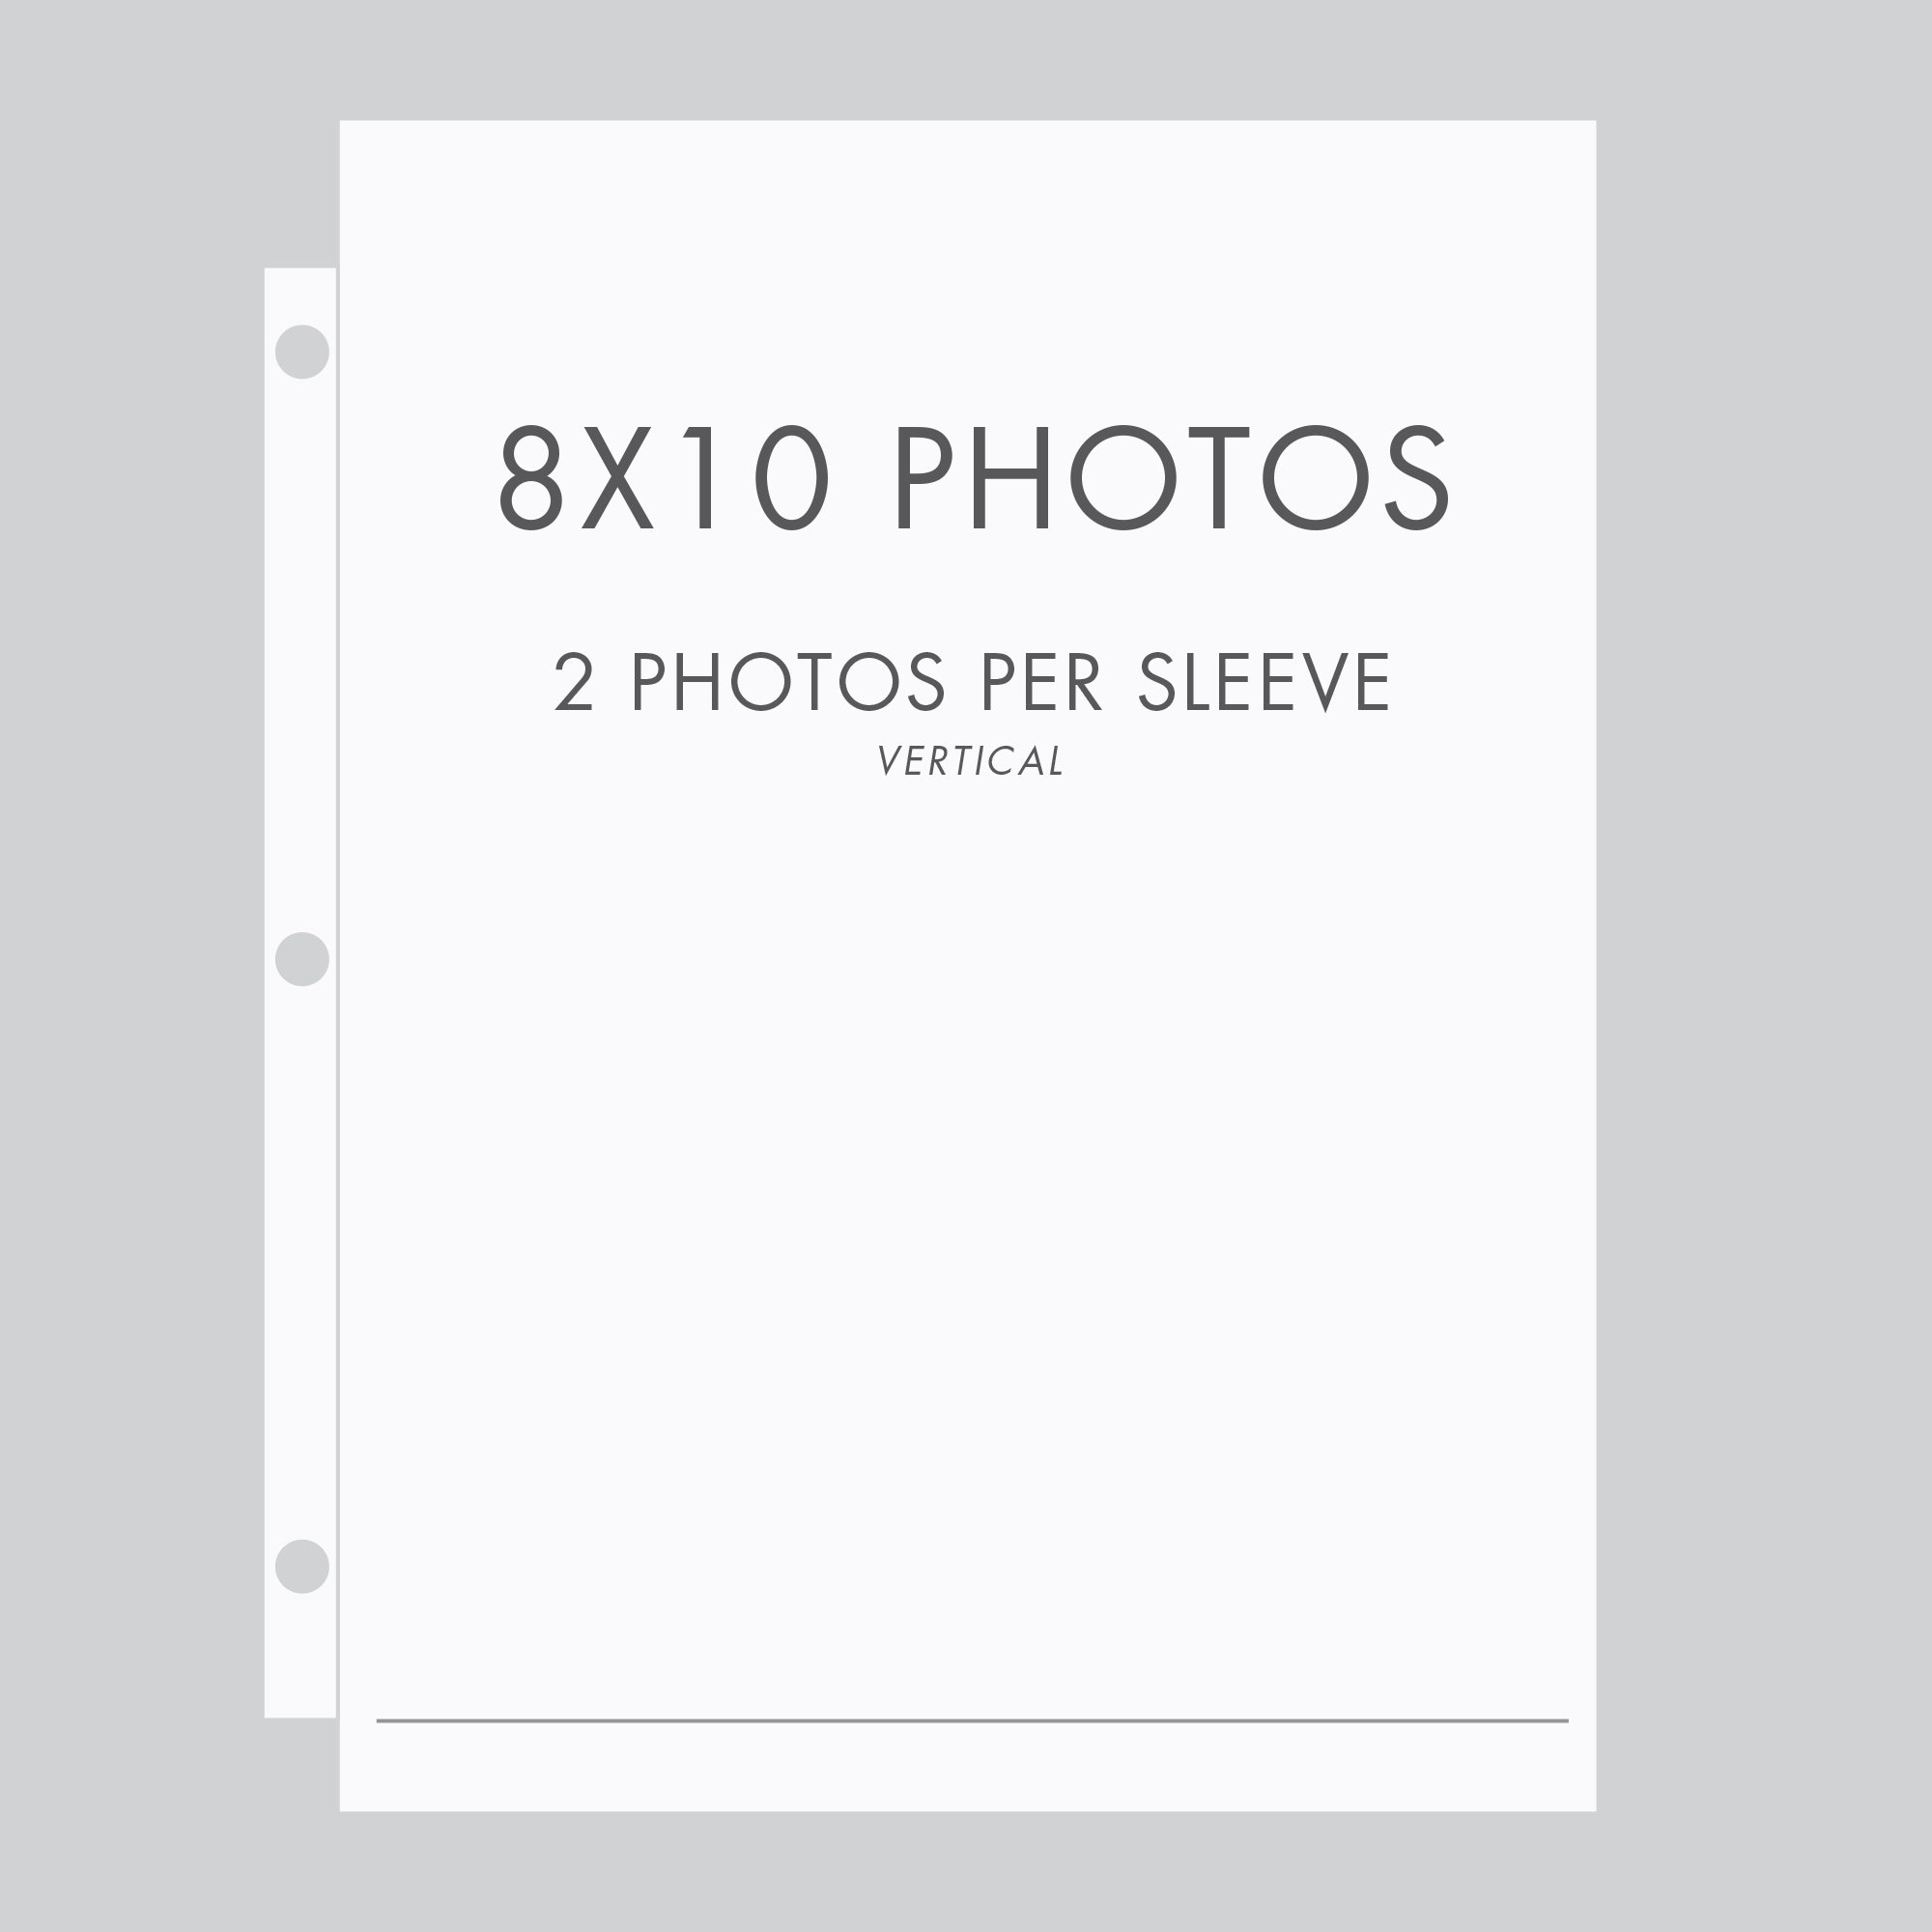 Sleeves for 4x6, 5x7, 8x10, 12x12 Photos Refills for Slip in Albums  10x15cm, 13x18cm 20x25cm and 30x30cm Photos Photo Album Pages 